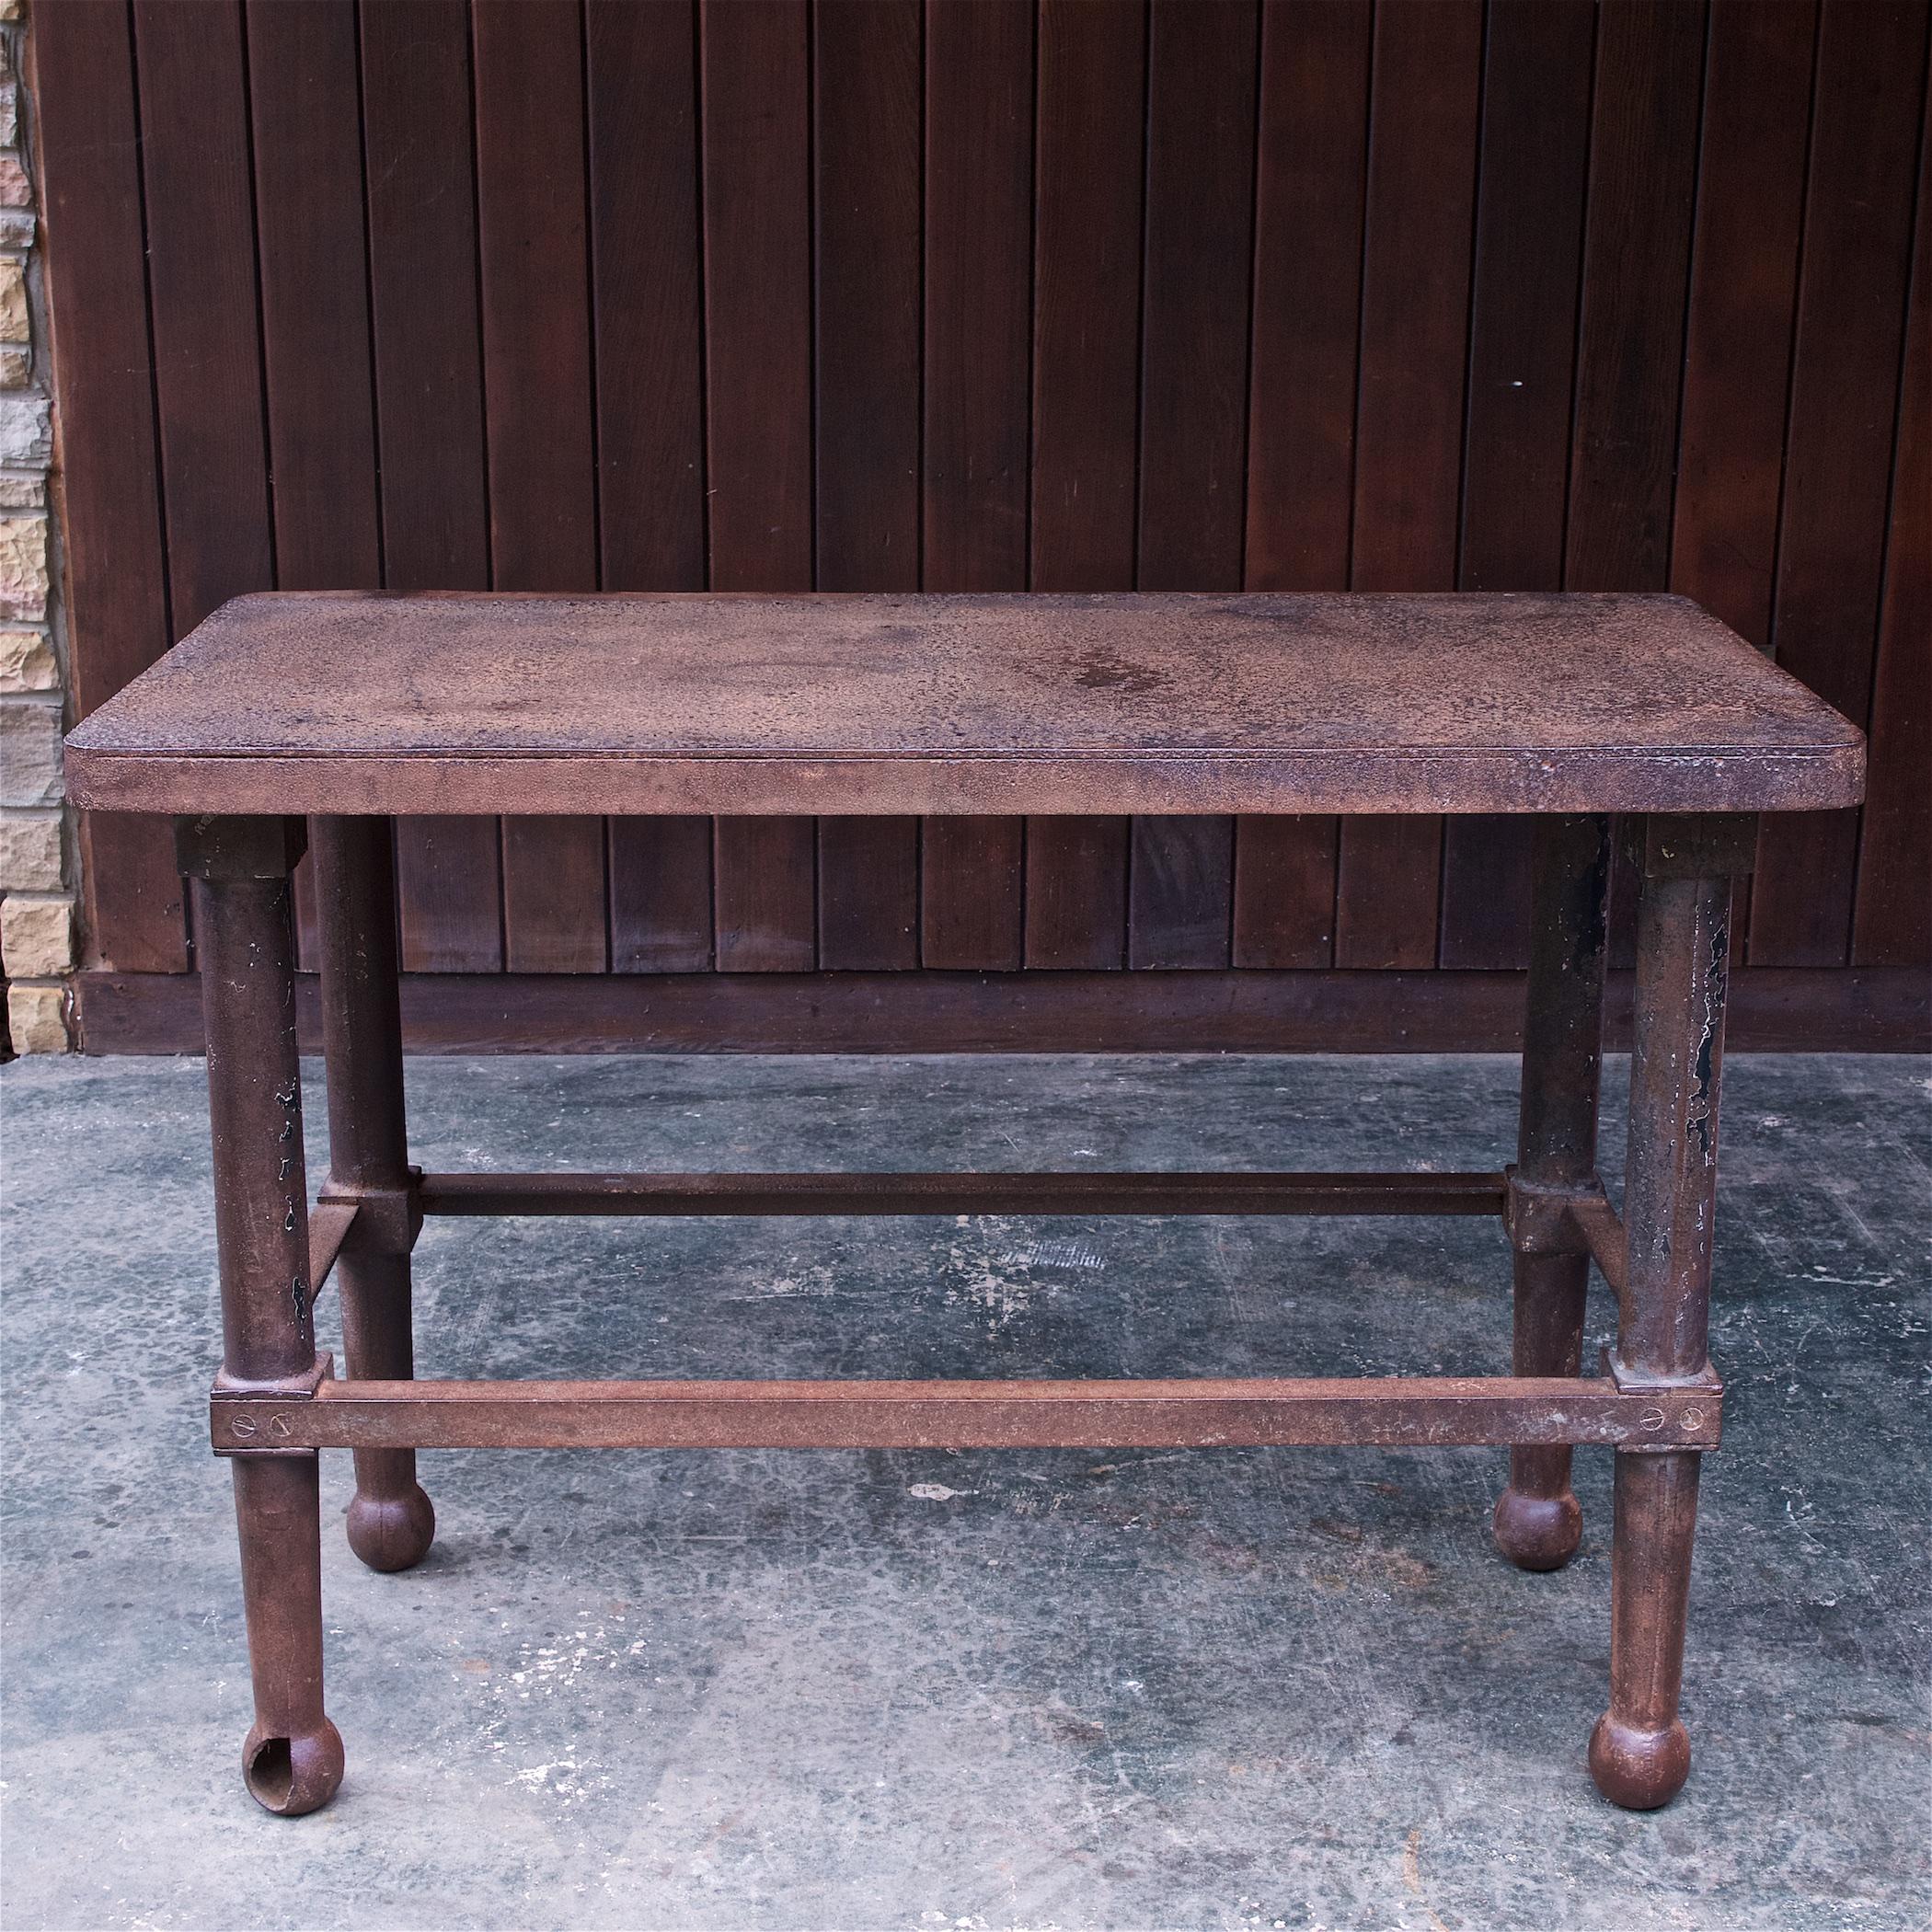 1880s Victorian Mercantile Forged Iron Work Table Vintage Industrial Console In Distressed Condition For Sale In Hyattsville, MD